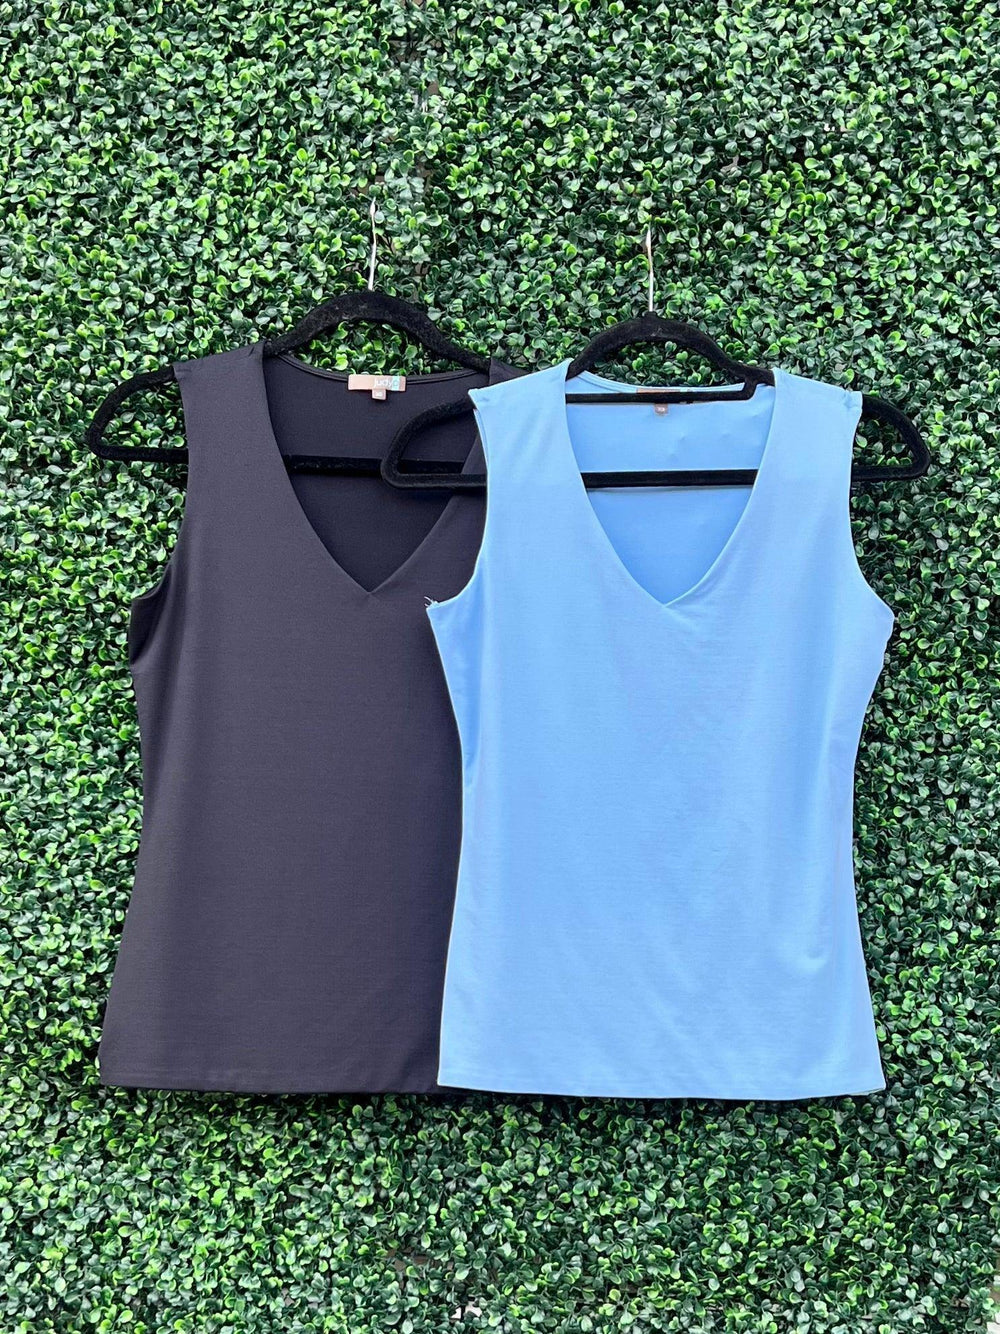 Black and light blue tank tops from tres chic boutique